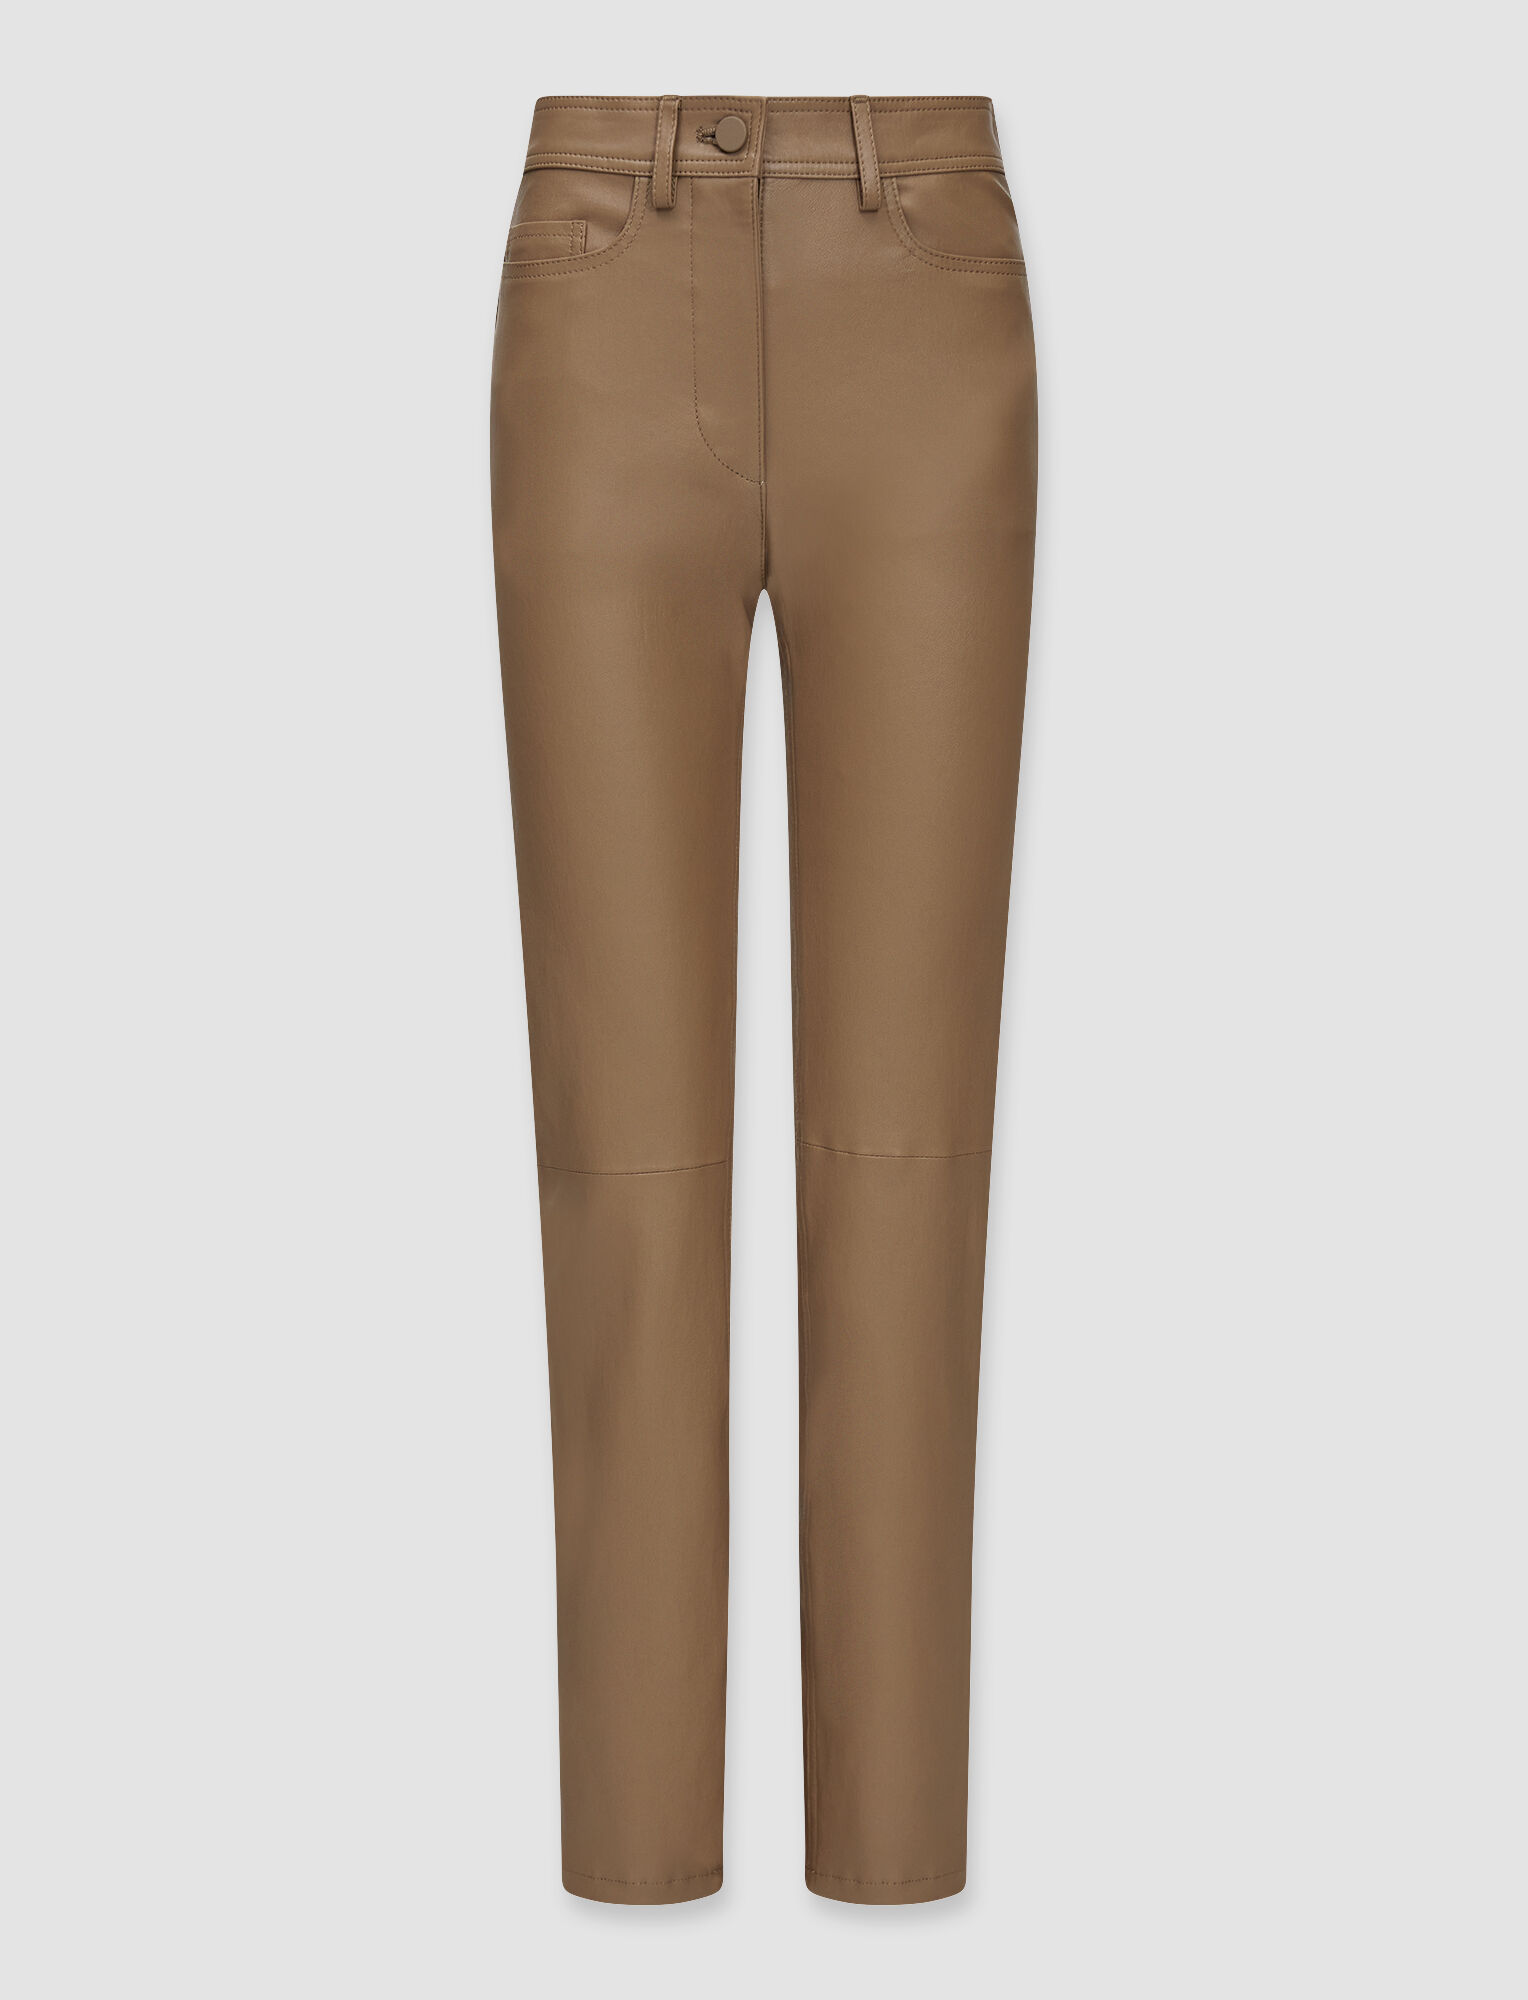 Joseph, Leather Stretch Teddy Trousers, in Camel